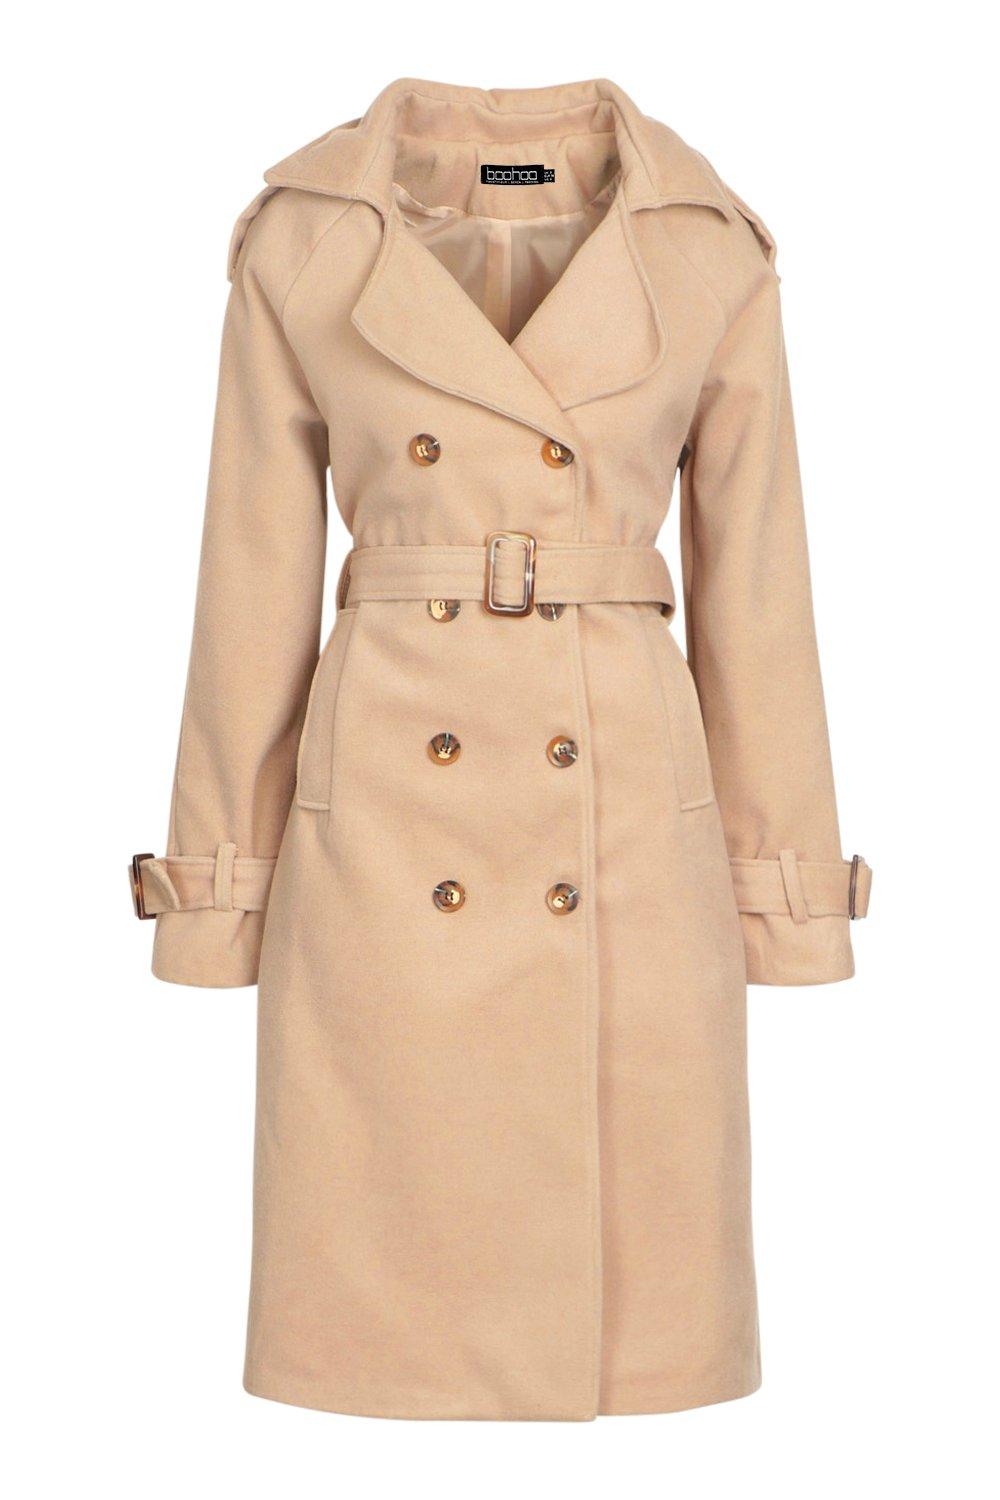 Louis Féraud Contraire belted trench coat. New wool blend brown/stone.  £499.00